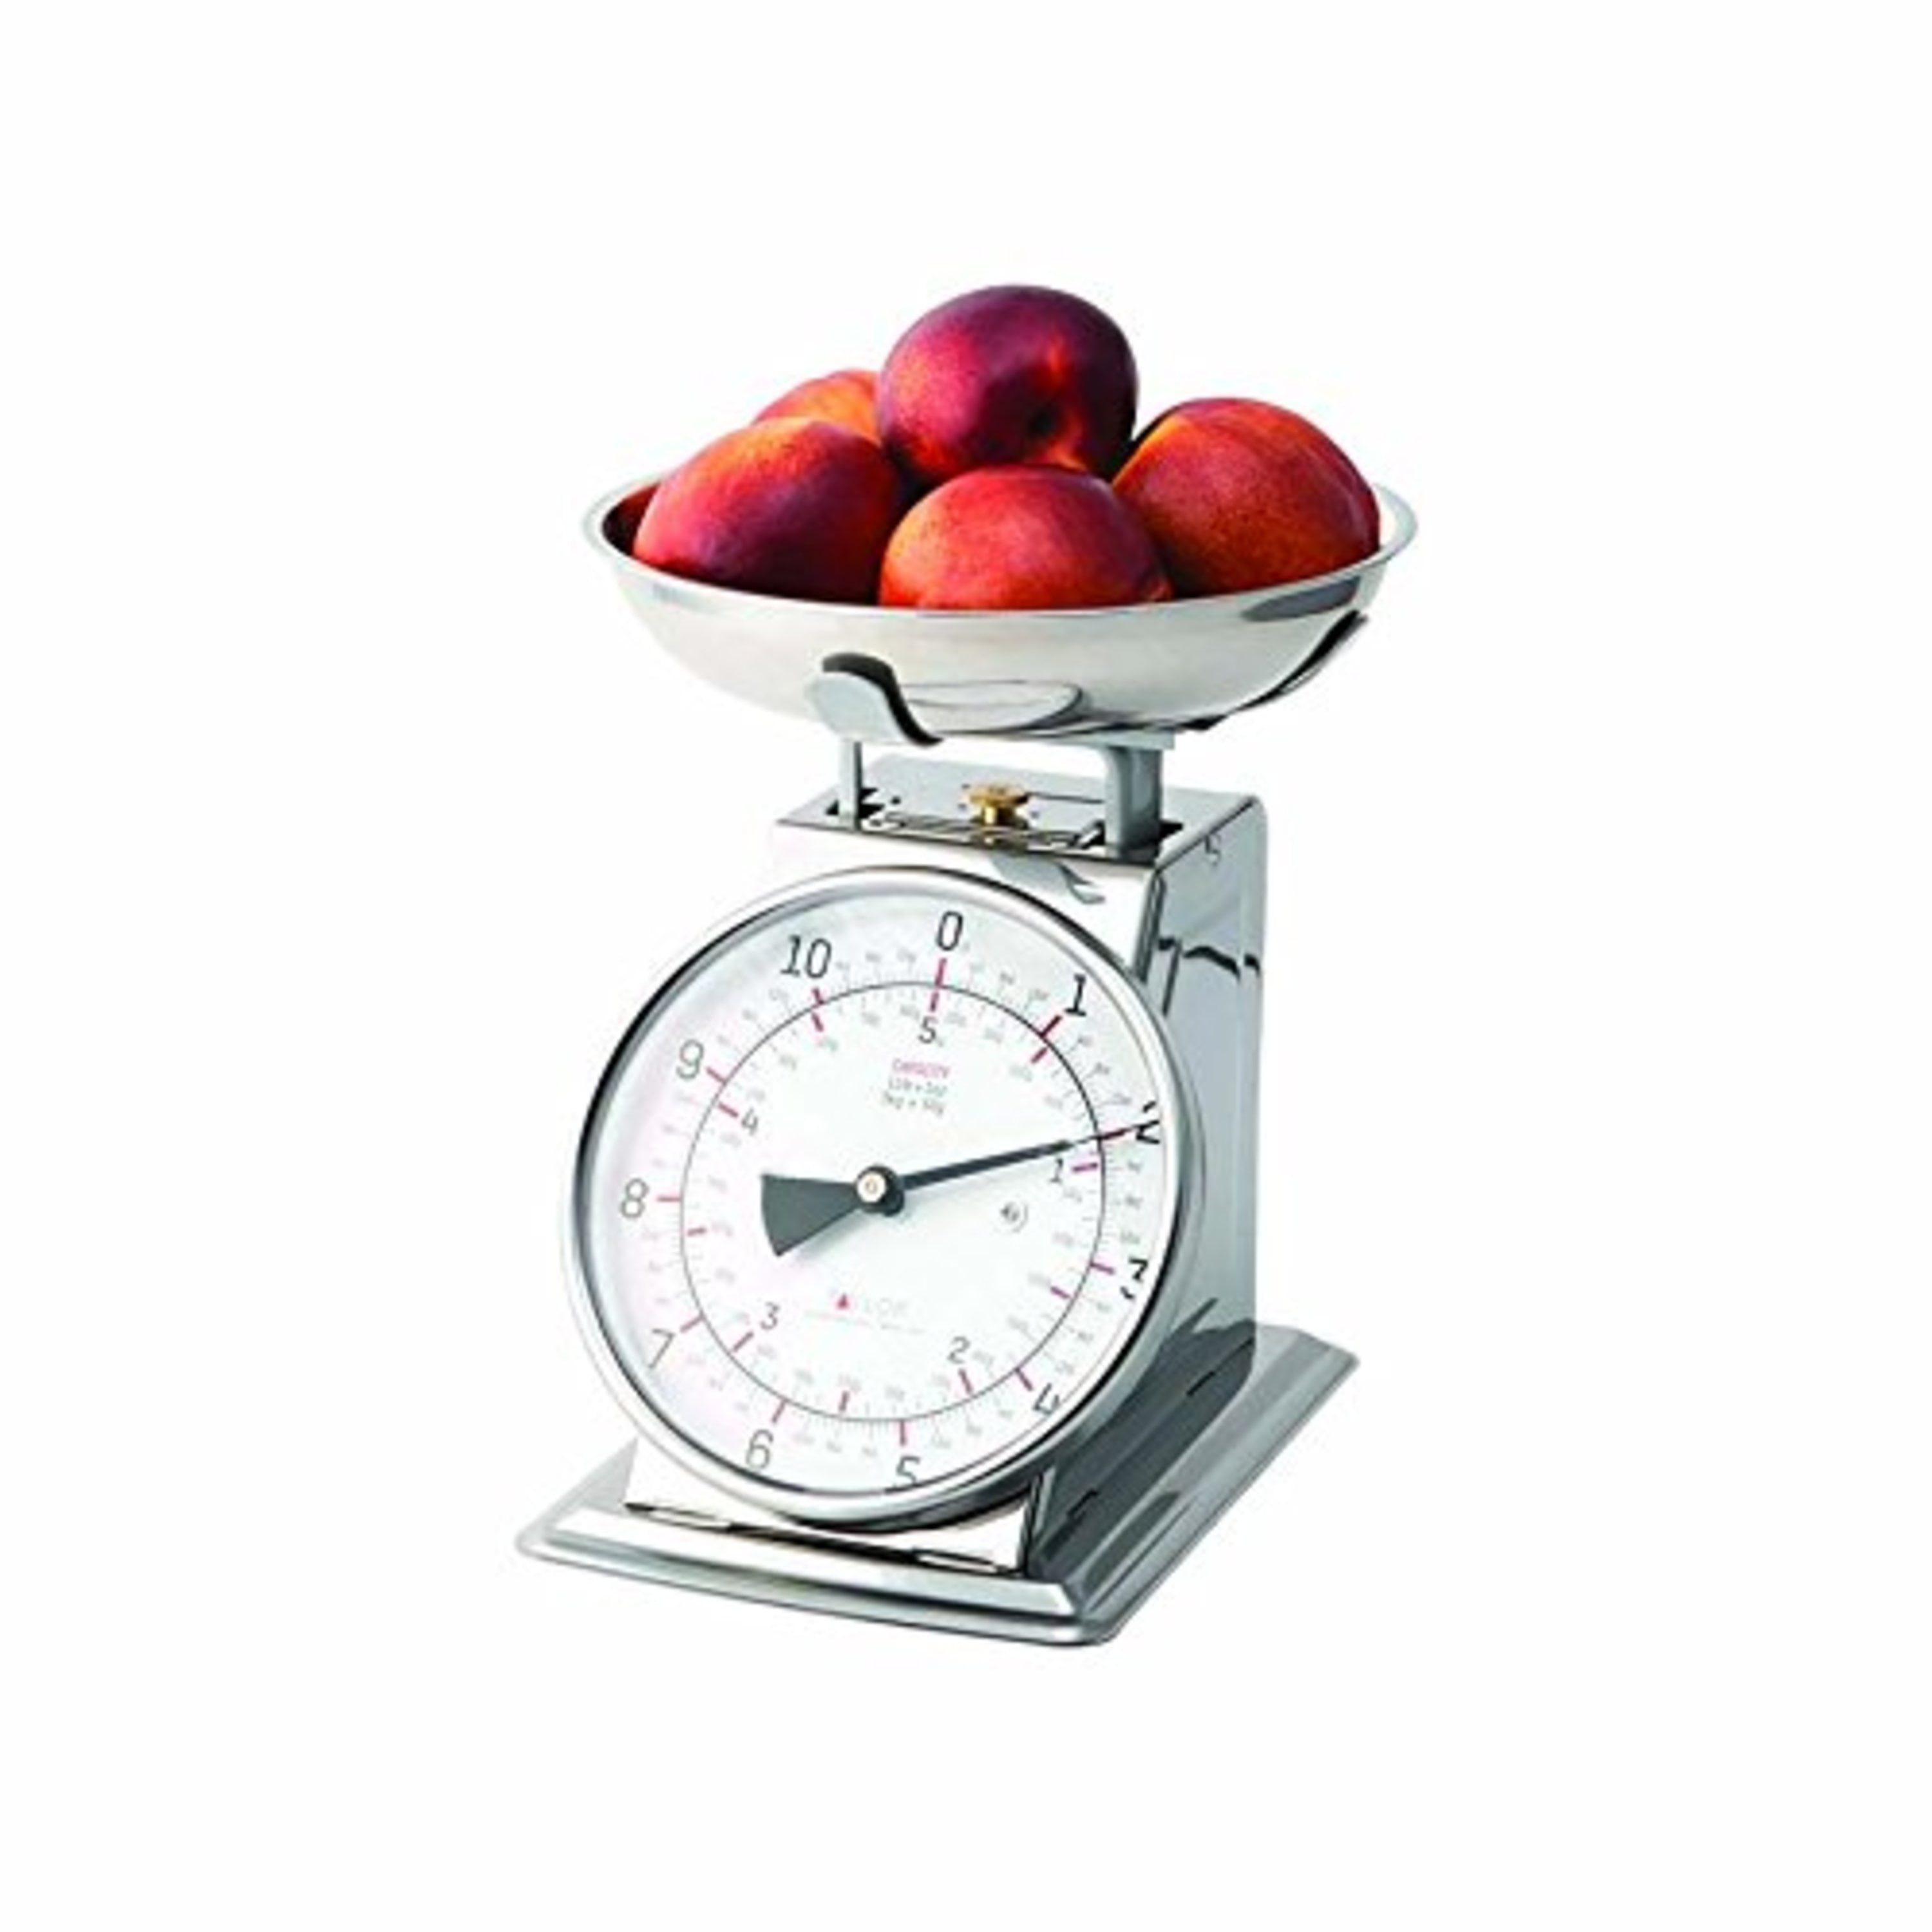 Tada 11lb Precise Portions Analog Food Scale Stainless Steel Mechanical  Kitchen Scale, Removable Bowl, Tare Function, Retro Style, Kitchen Friendly